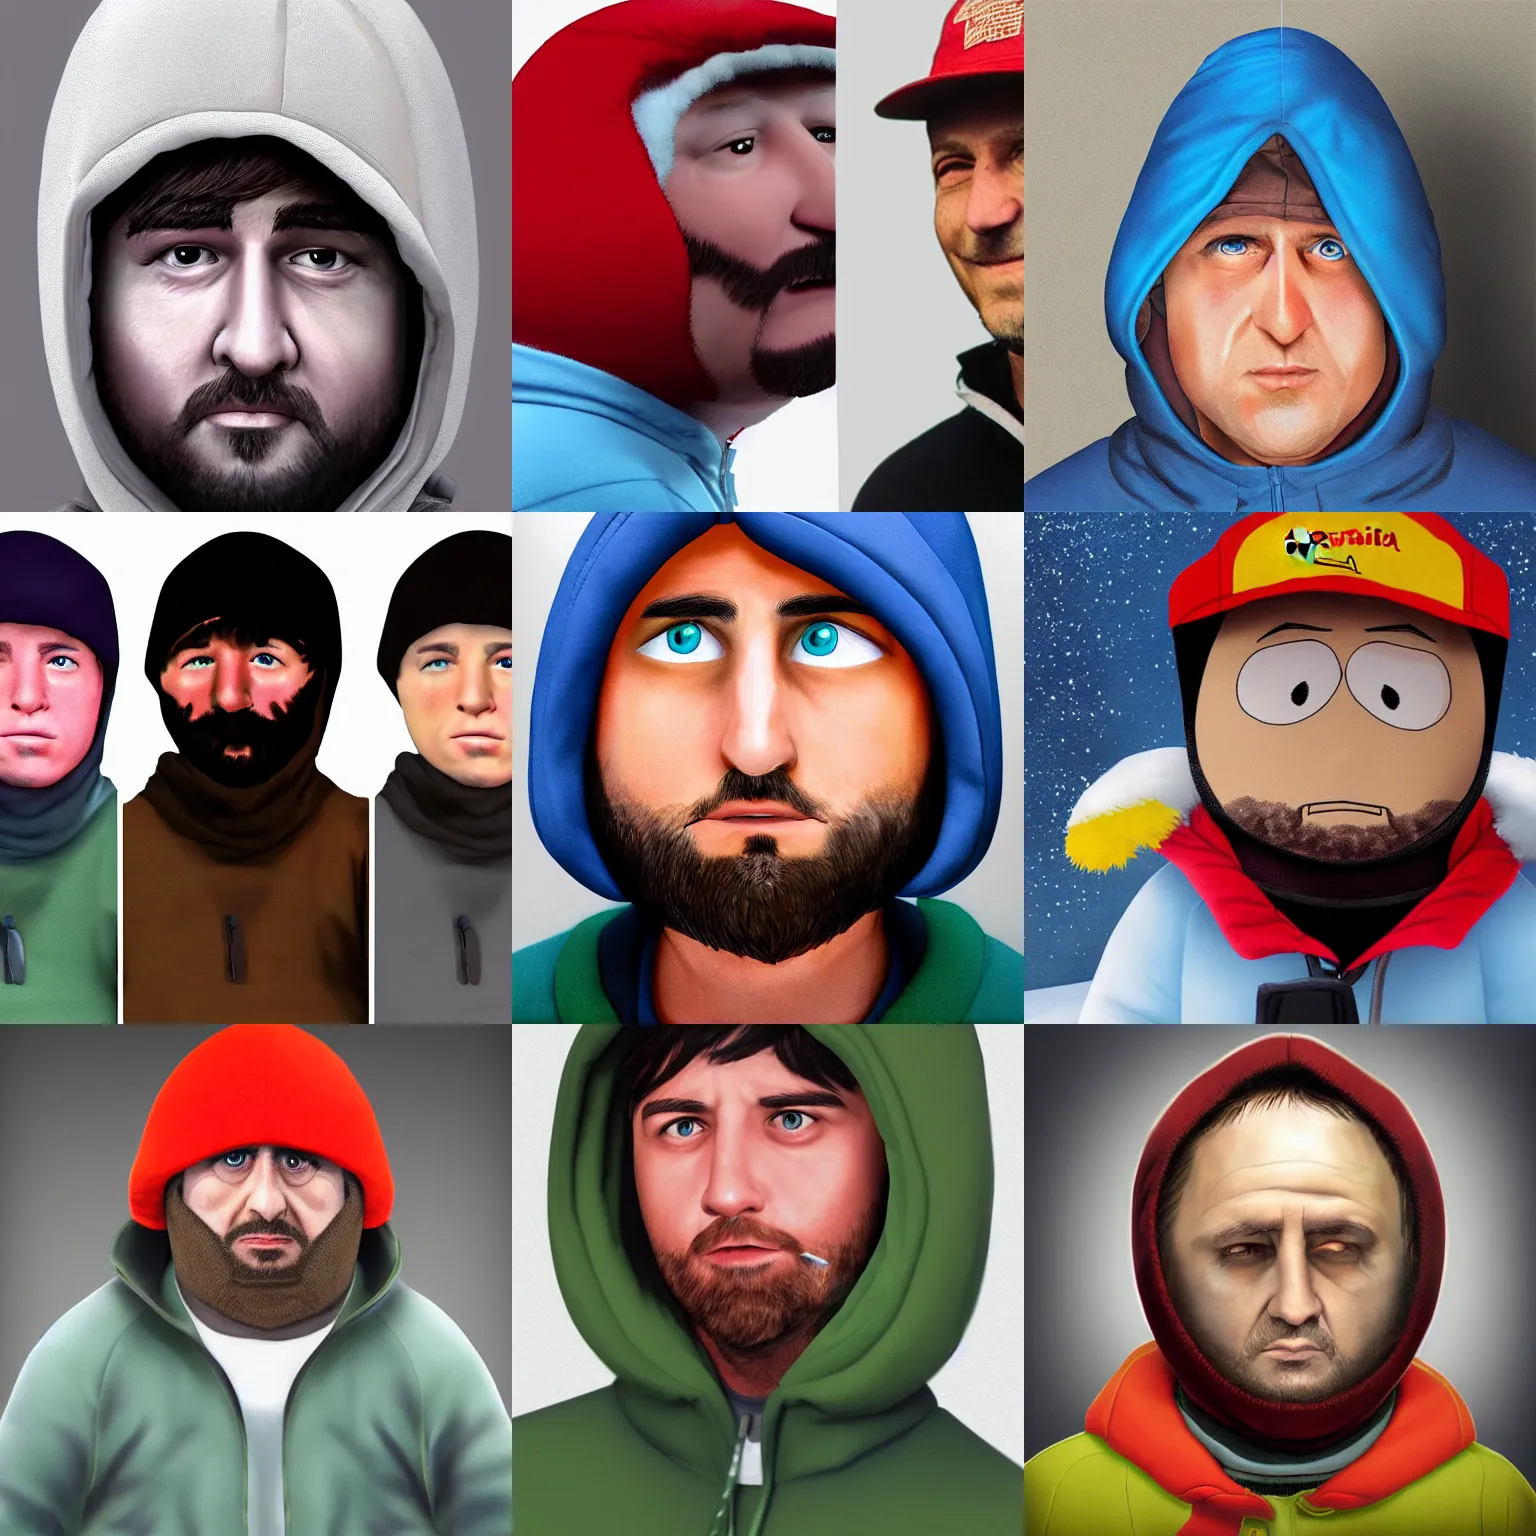 Prompt: Ultra realistic illustration, portrait photograph, Kenny from South Park as a real person